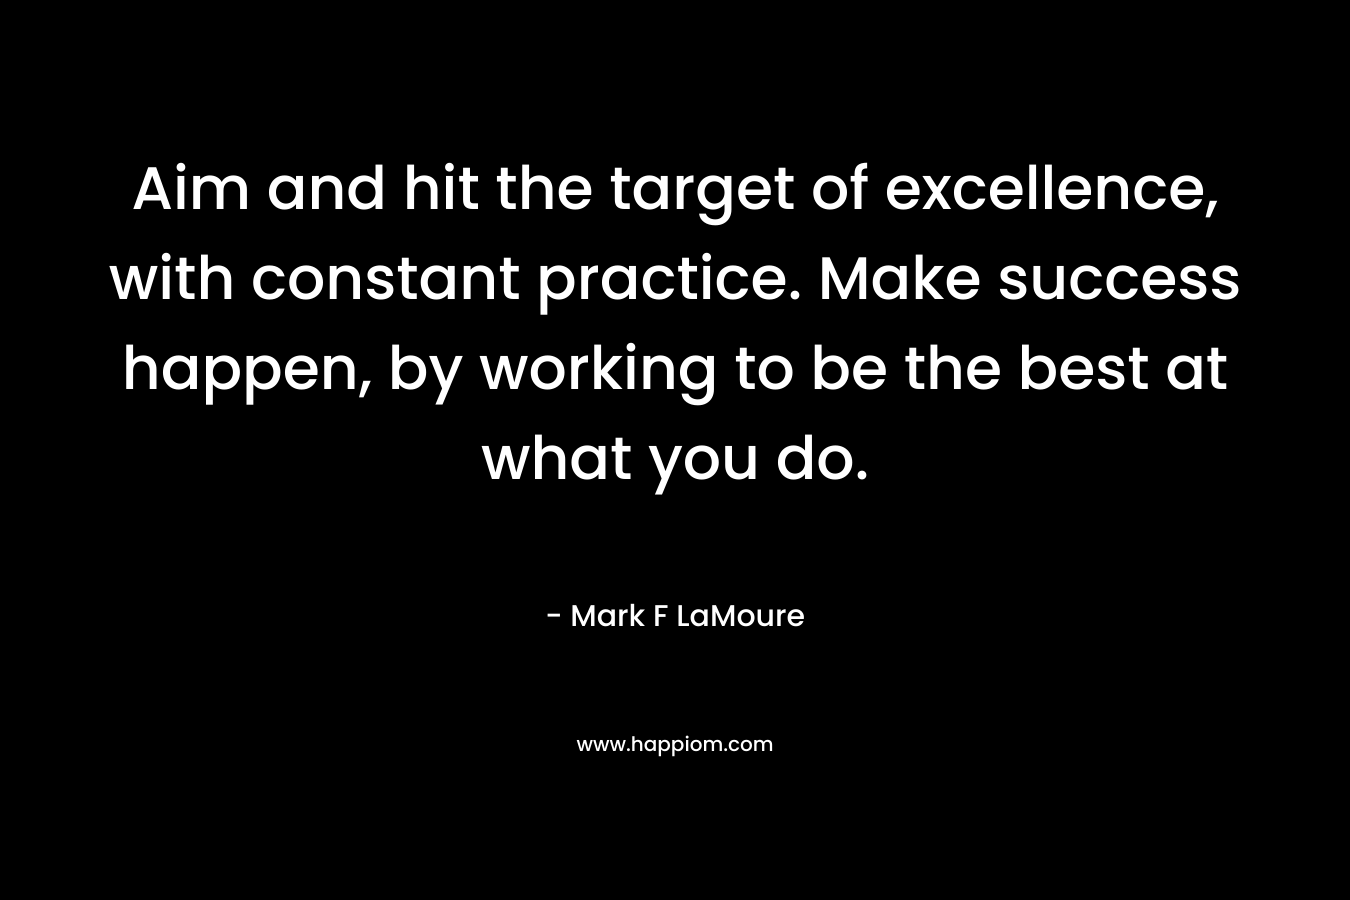 Aim and hit the target of excellence, with constant practice. Make success happen, by working to be the best at what you do.